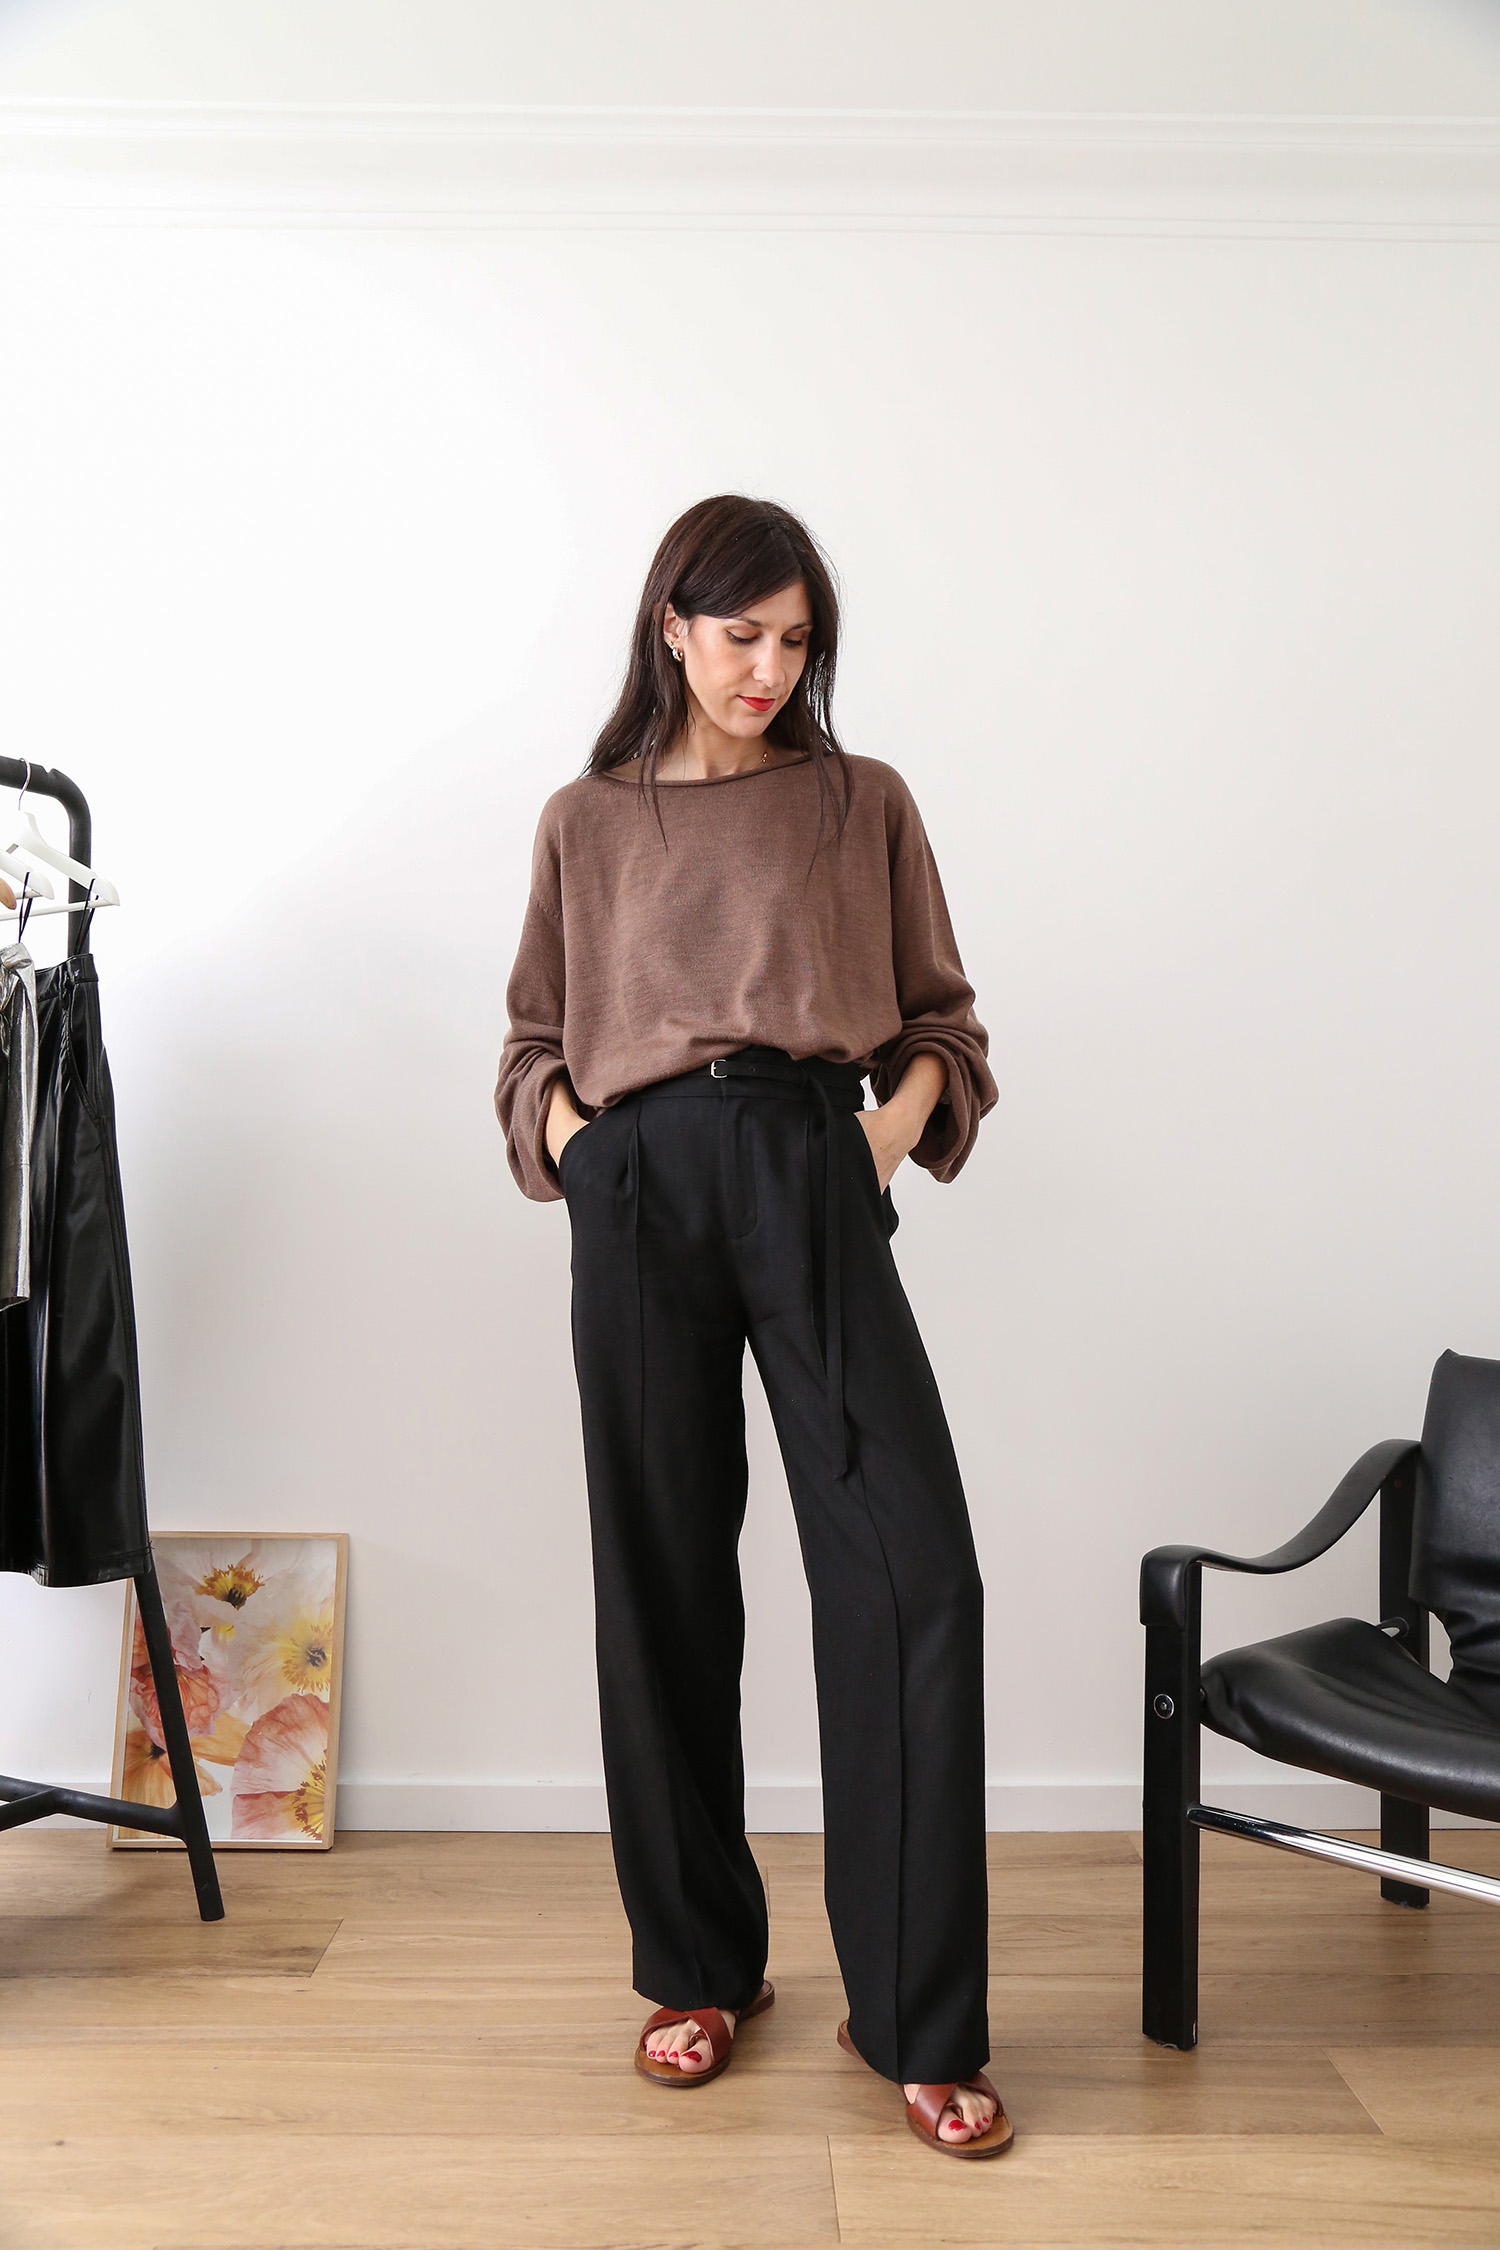 Oversized sweater with tailored trousers Parisian chic